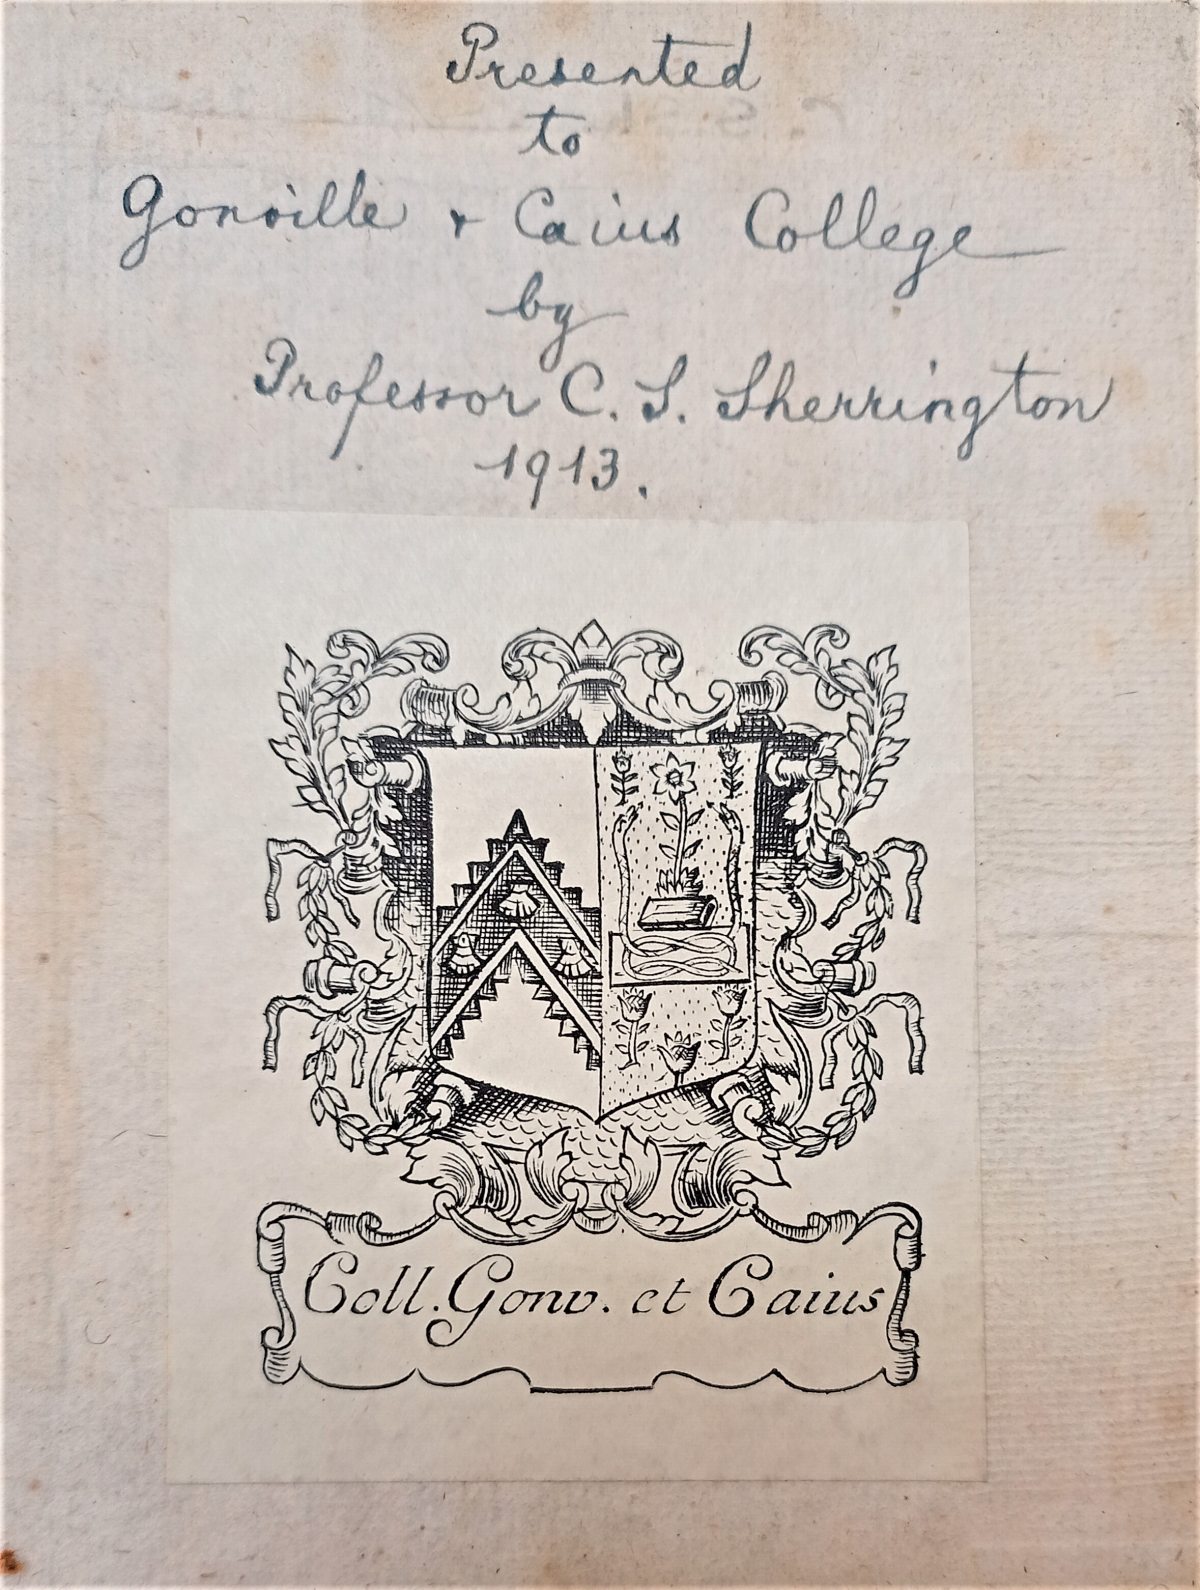 A page from the book with the Gonville and Caius bookplate stuck to it, above which is a handwritten note reading 'presented to Gonville and Caius College by Professor C. S. Sherrington, 1913.'